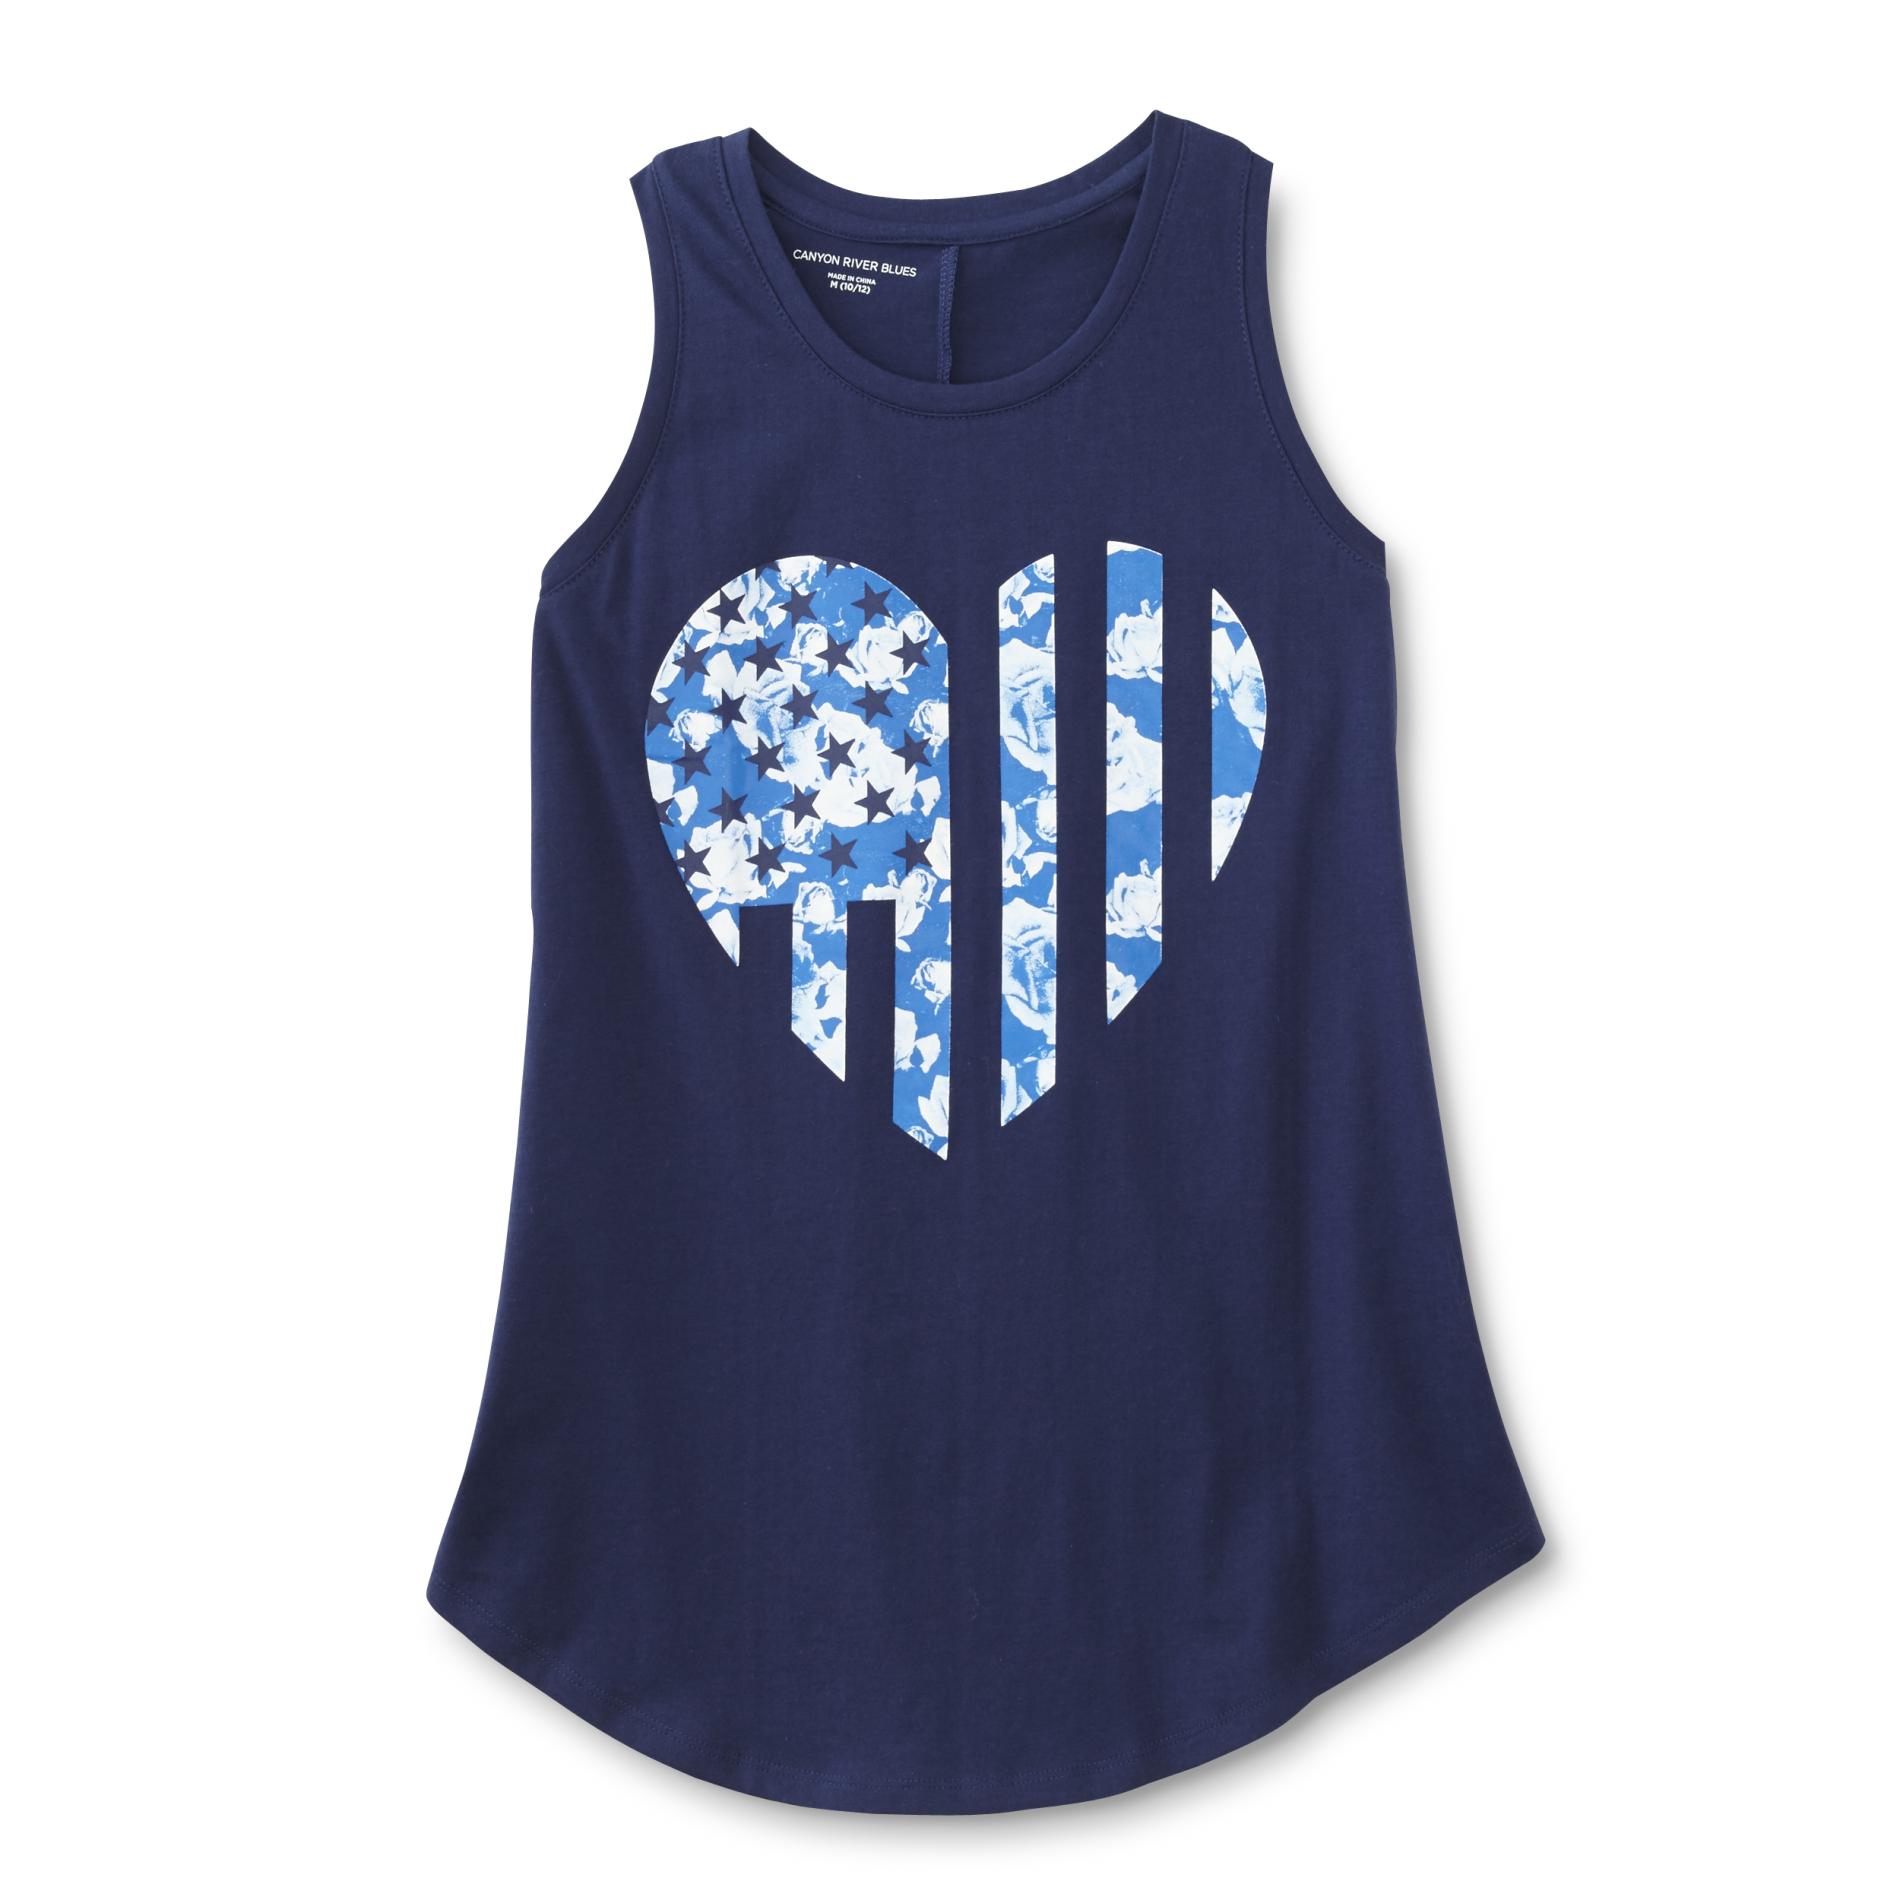 Girl's Graphic Tank Top - Heart